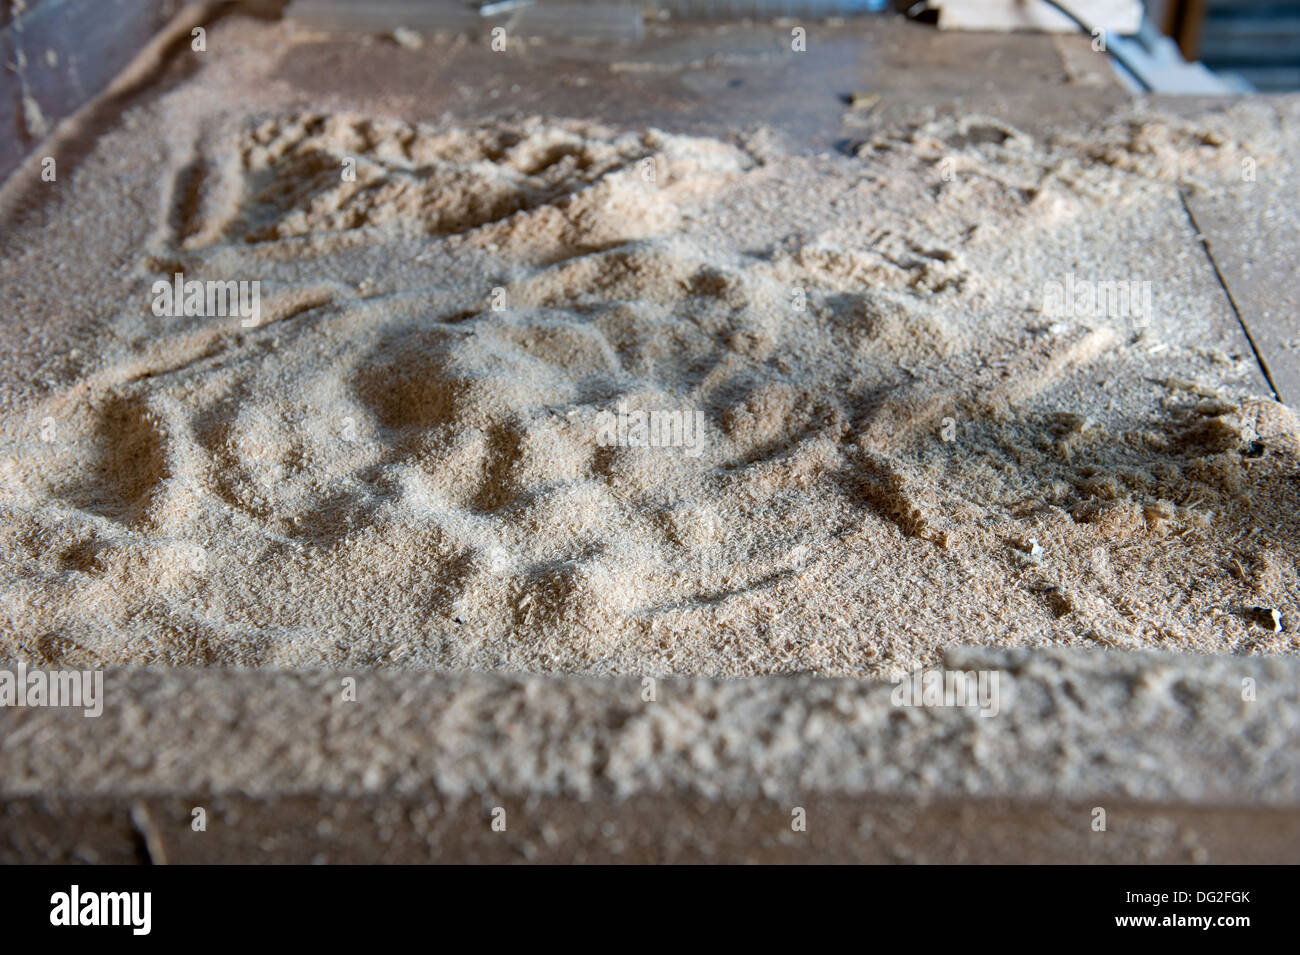 A pile of sawdust on a workshop bench. Stock Photo